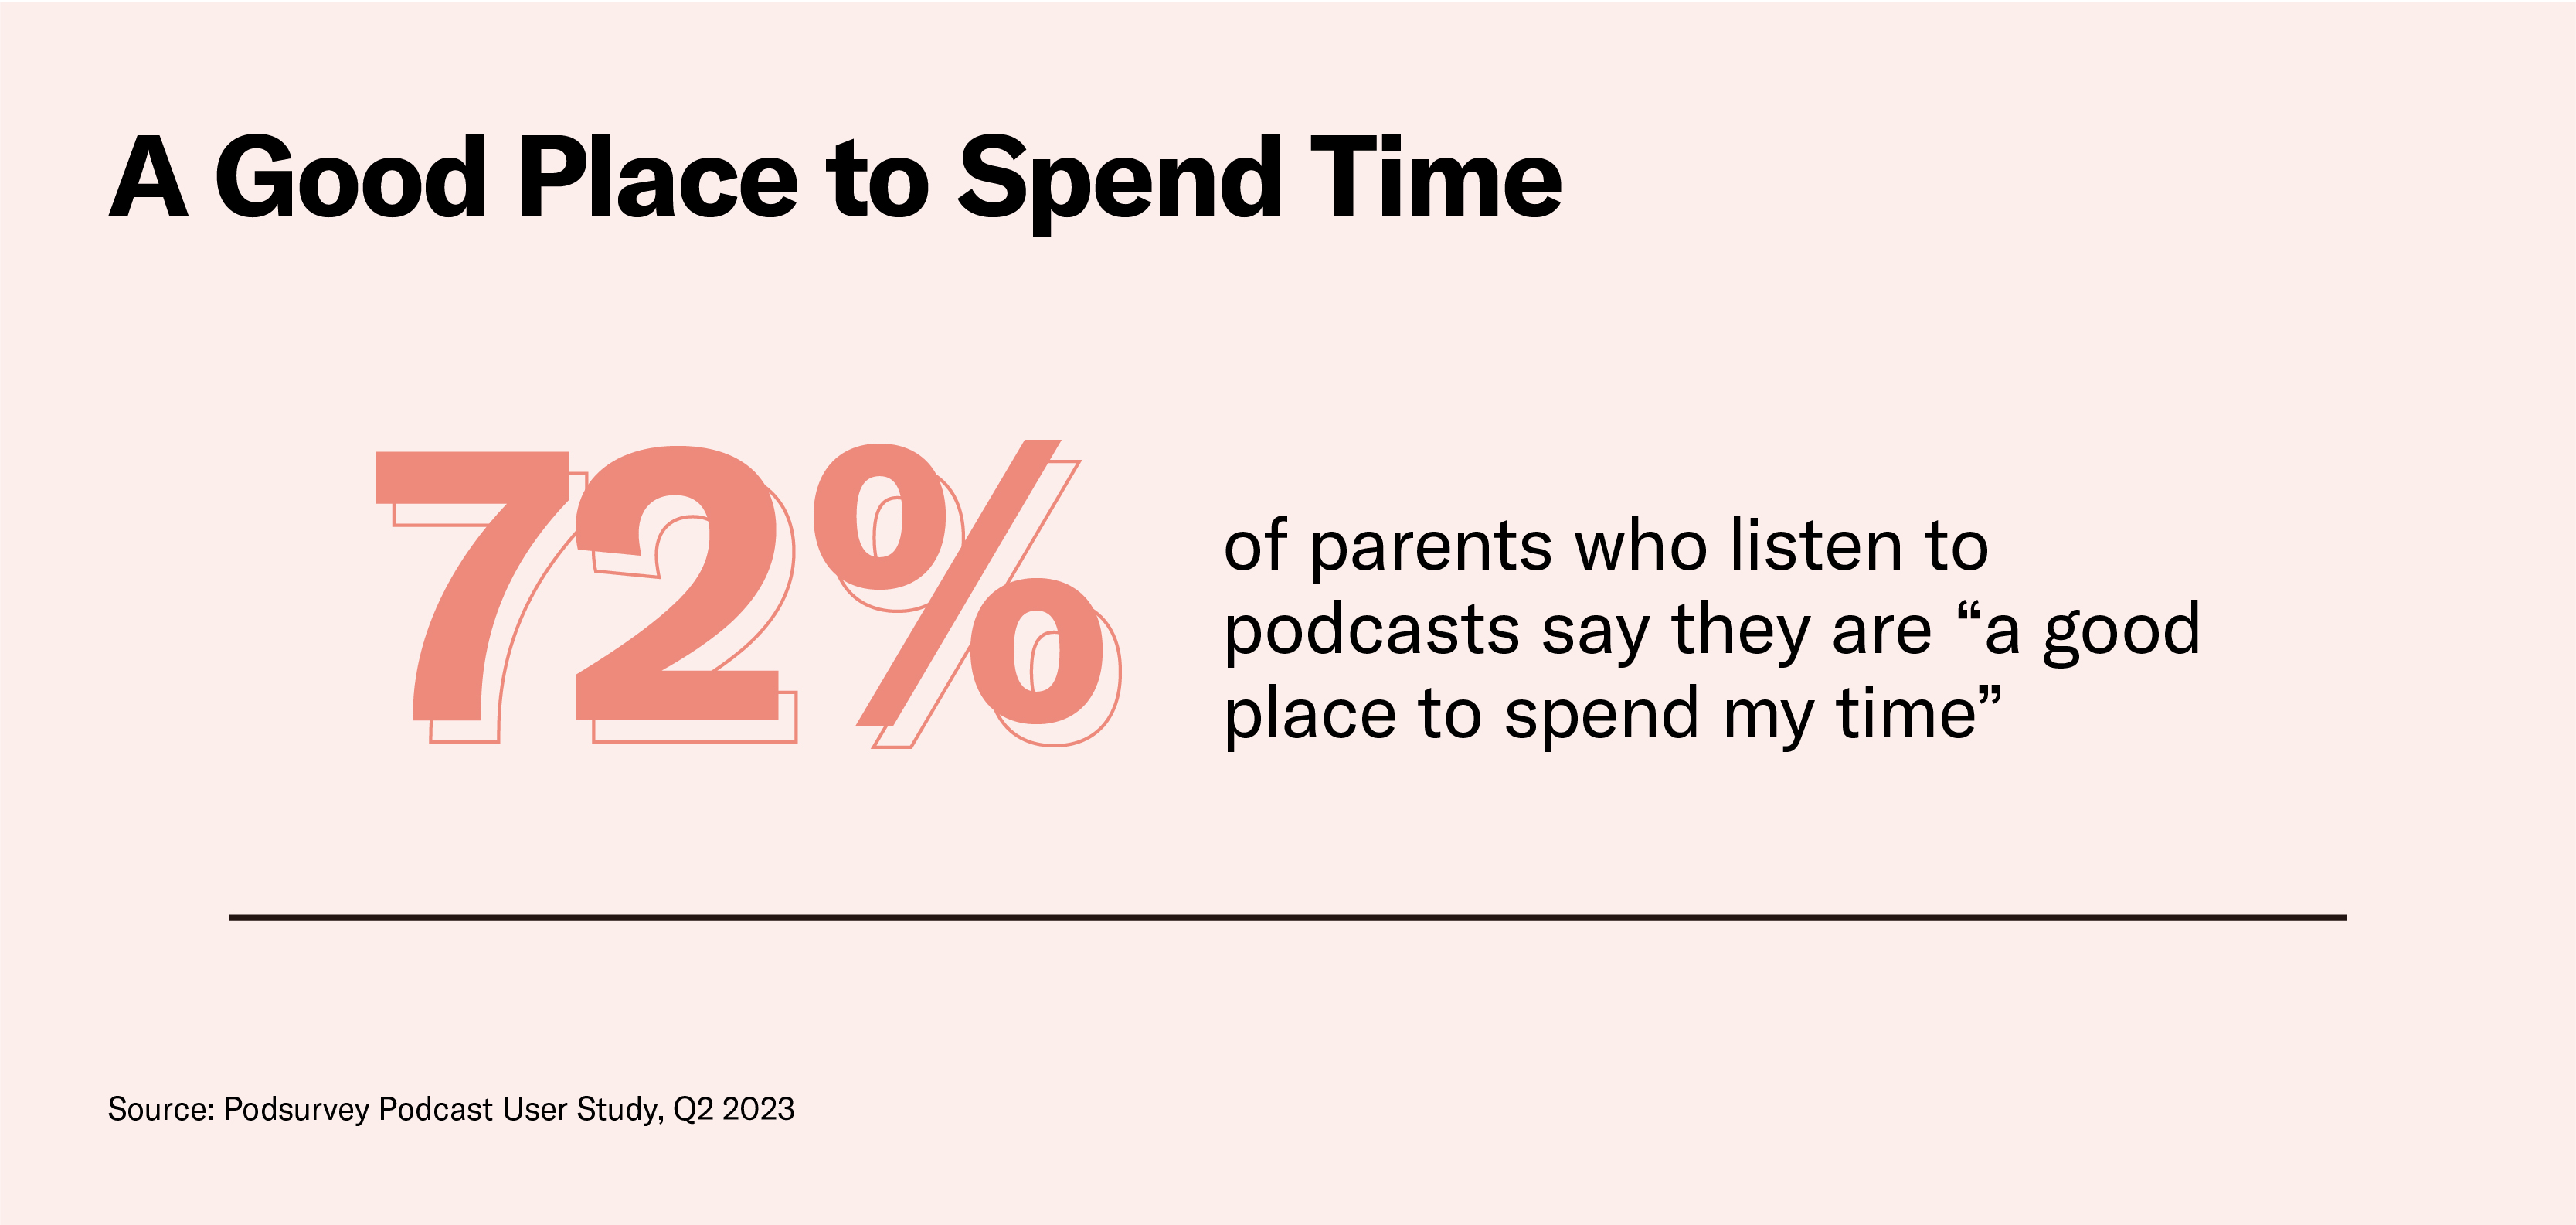 parents say podcasts are a good place to spend time